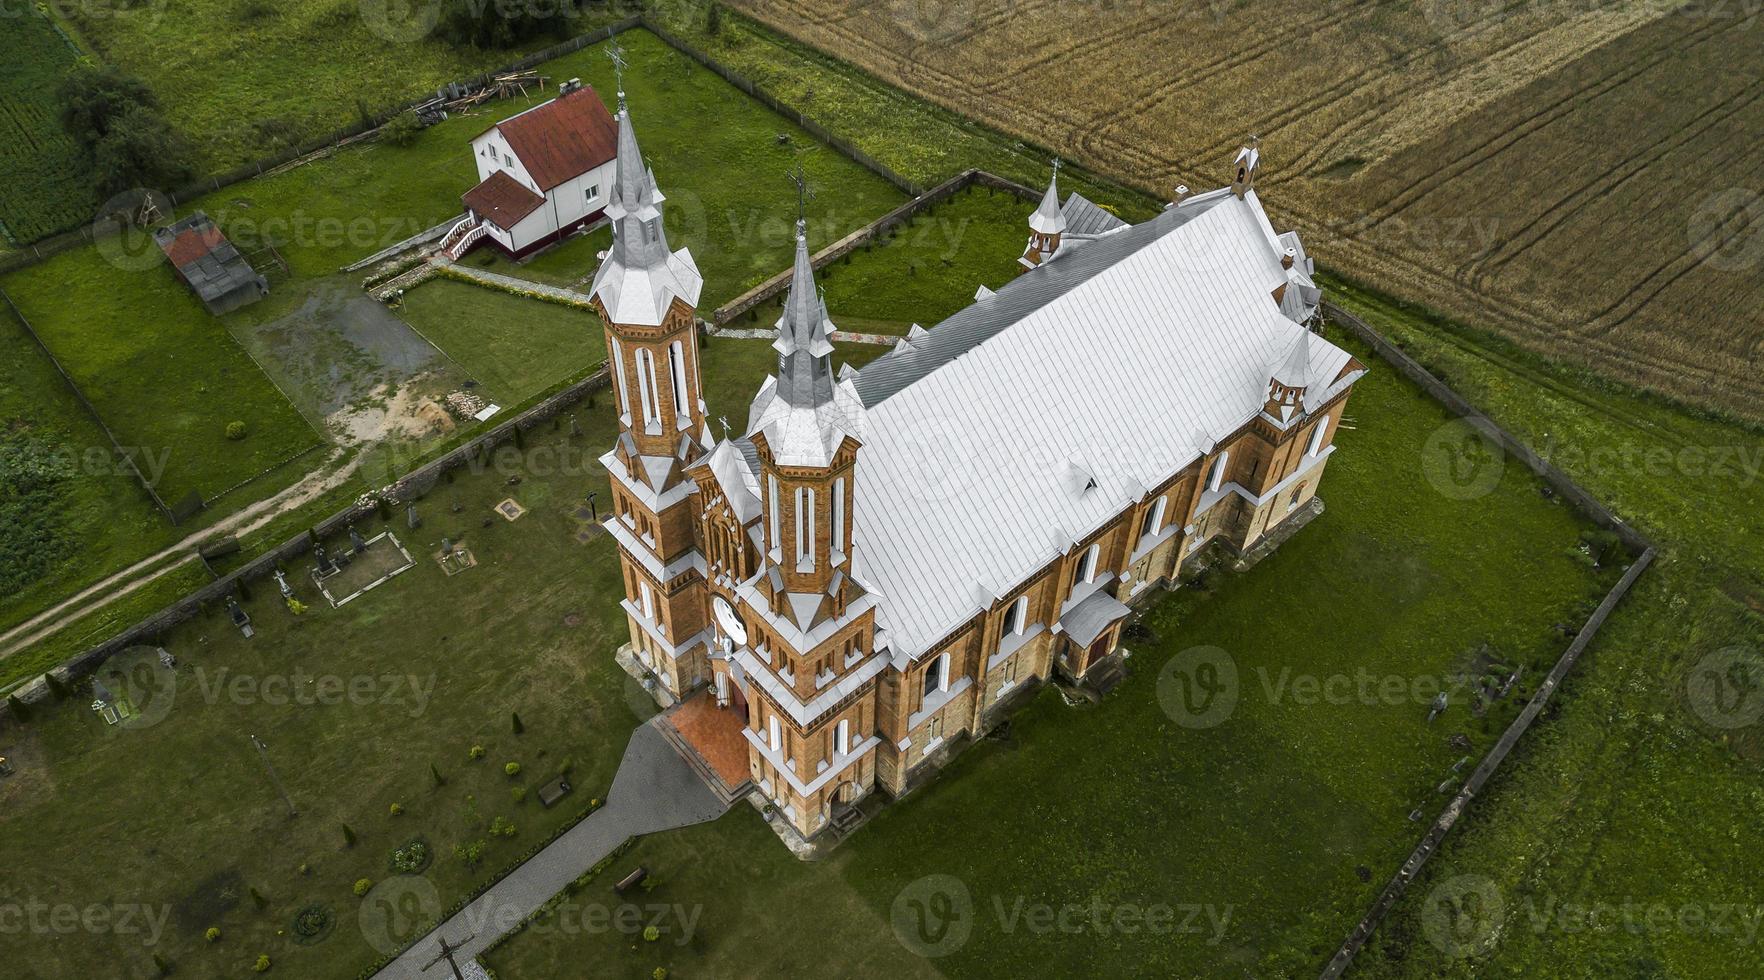 the old Catholic Church is a top view of the drone aerial photography photo